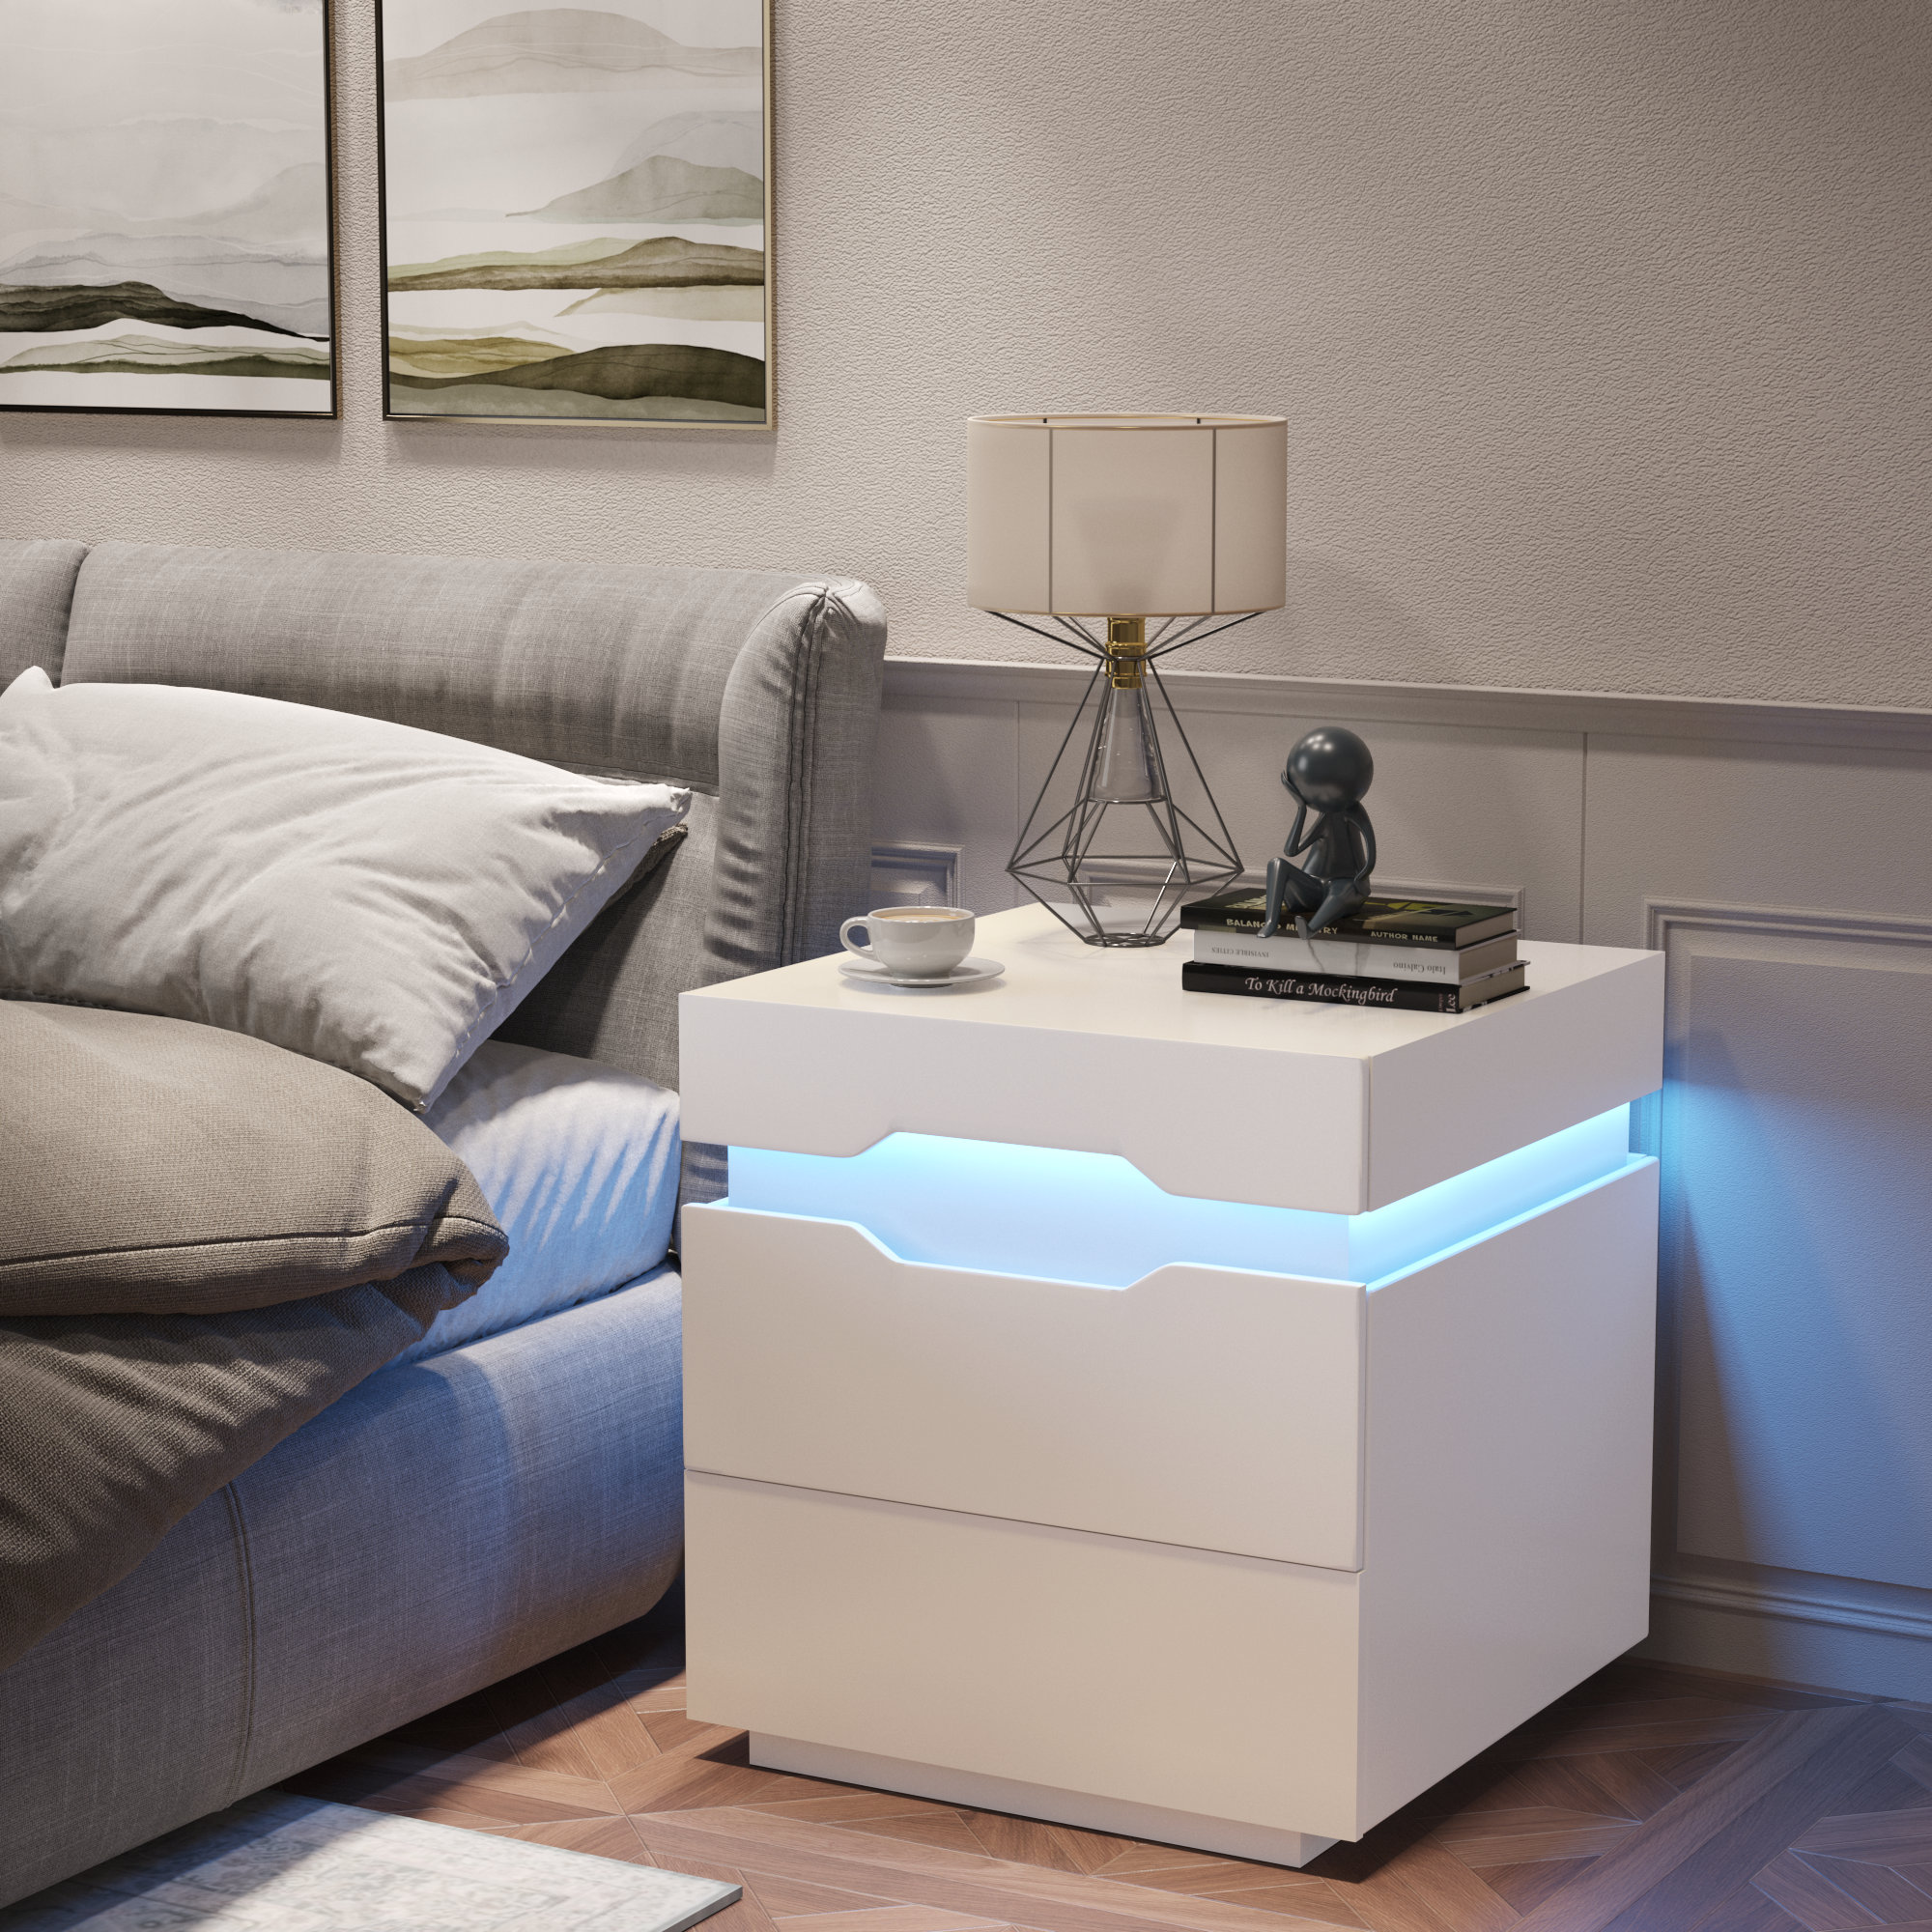 Emmakay Nightstand with Wireless Charging Station, LED Light and 2 Drawers